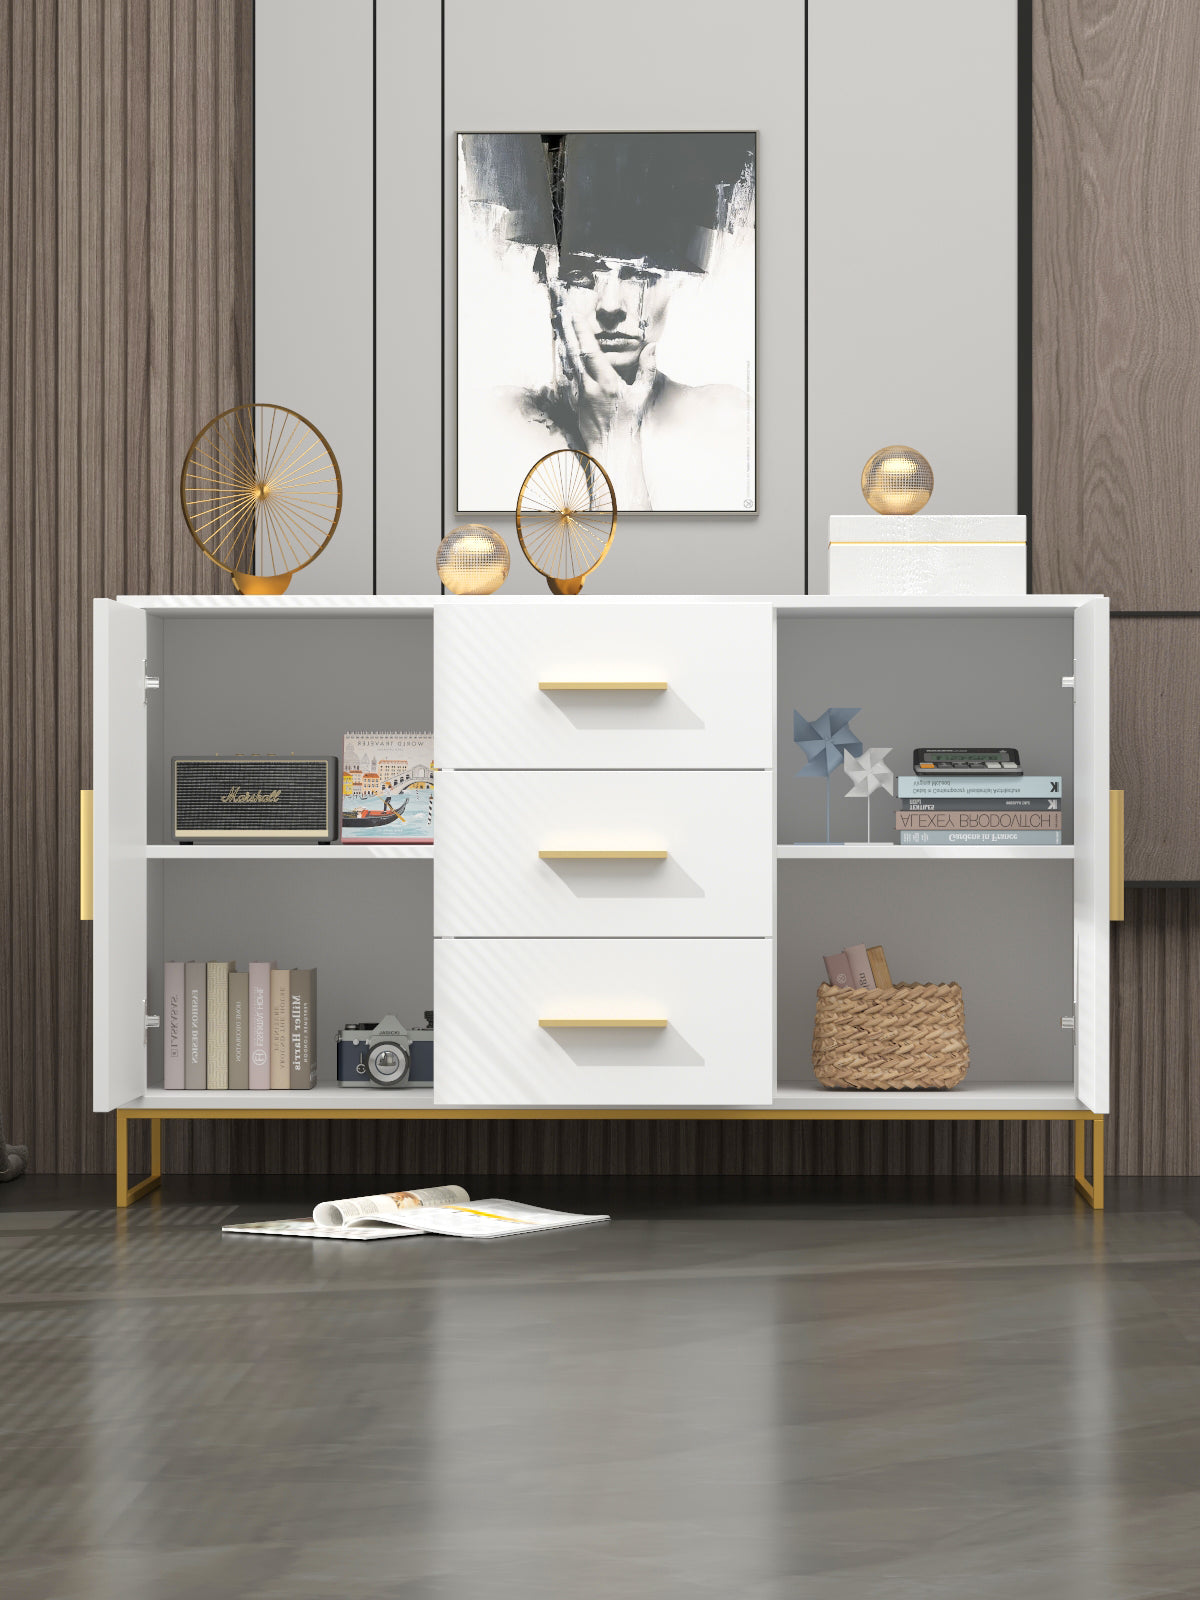 Buffet Sideboard with 3 Drawers & 2 Doors Storage Cabinet Sideboard Credenza Metal Legs for Dining Room and Living Room